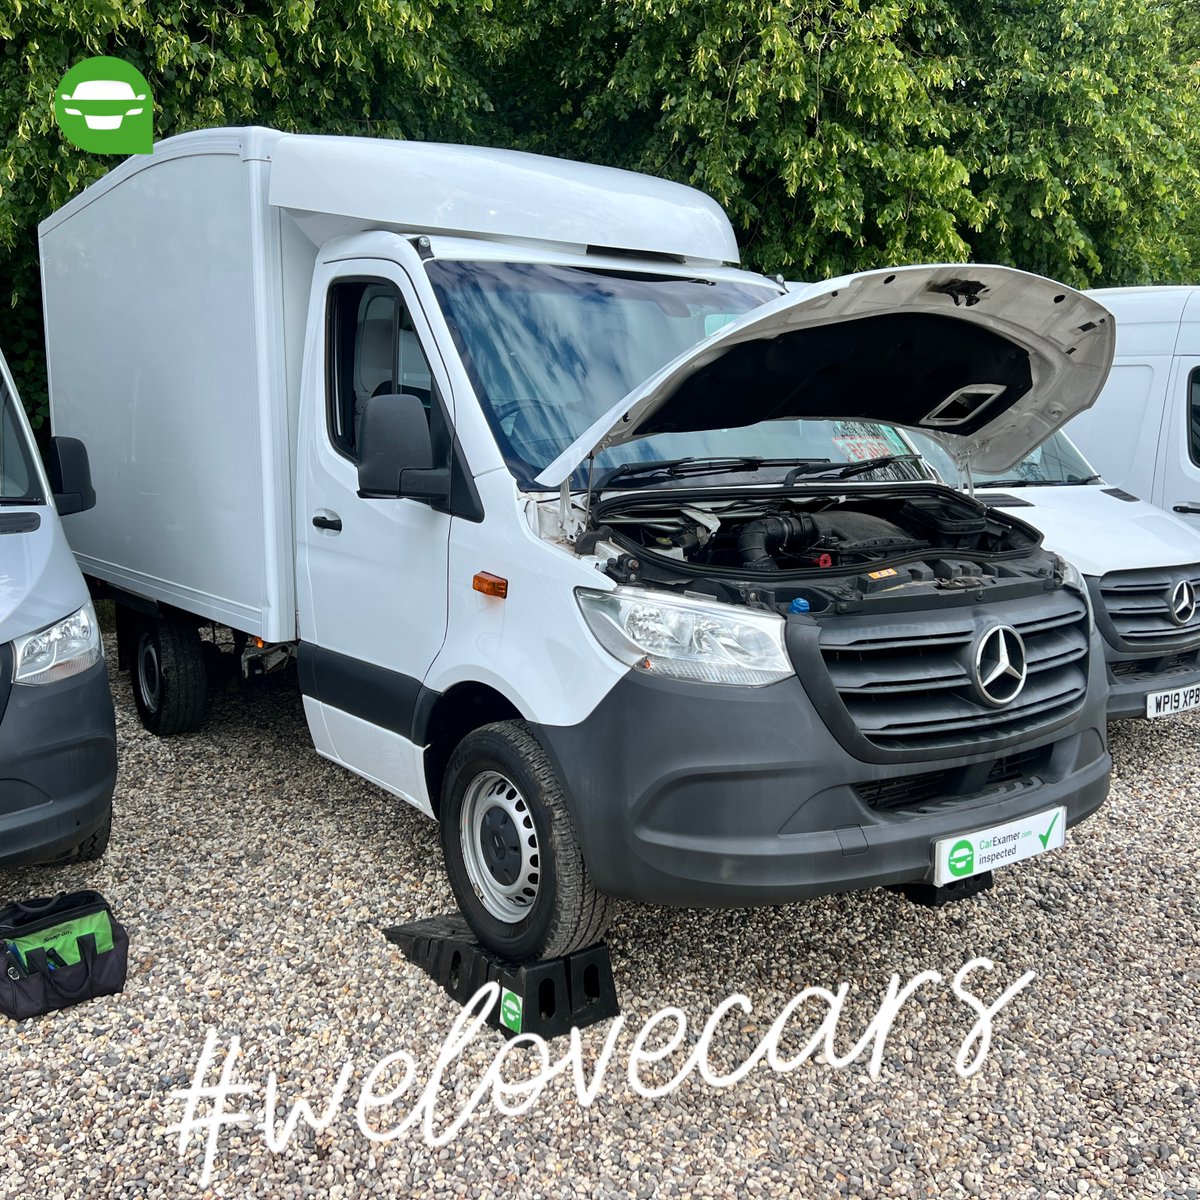 If you don’t inspect commercial vehicles you will suffer in long term. Self insured fleet vehicles comes with poor standards body work repairs. Internally repaired vehicles with poor drivers driving them ⚠️ watch from who you buy

#usedvan #usedcar #carinspection